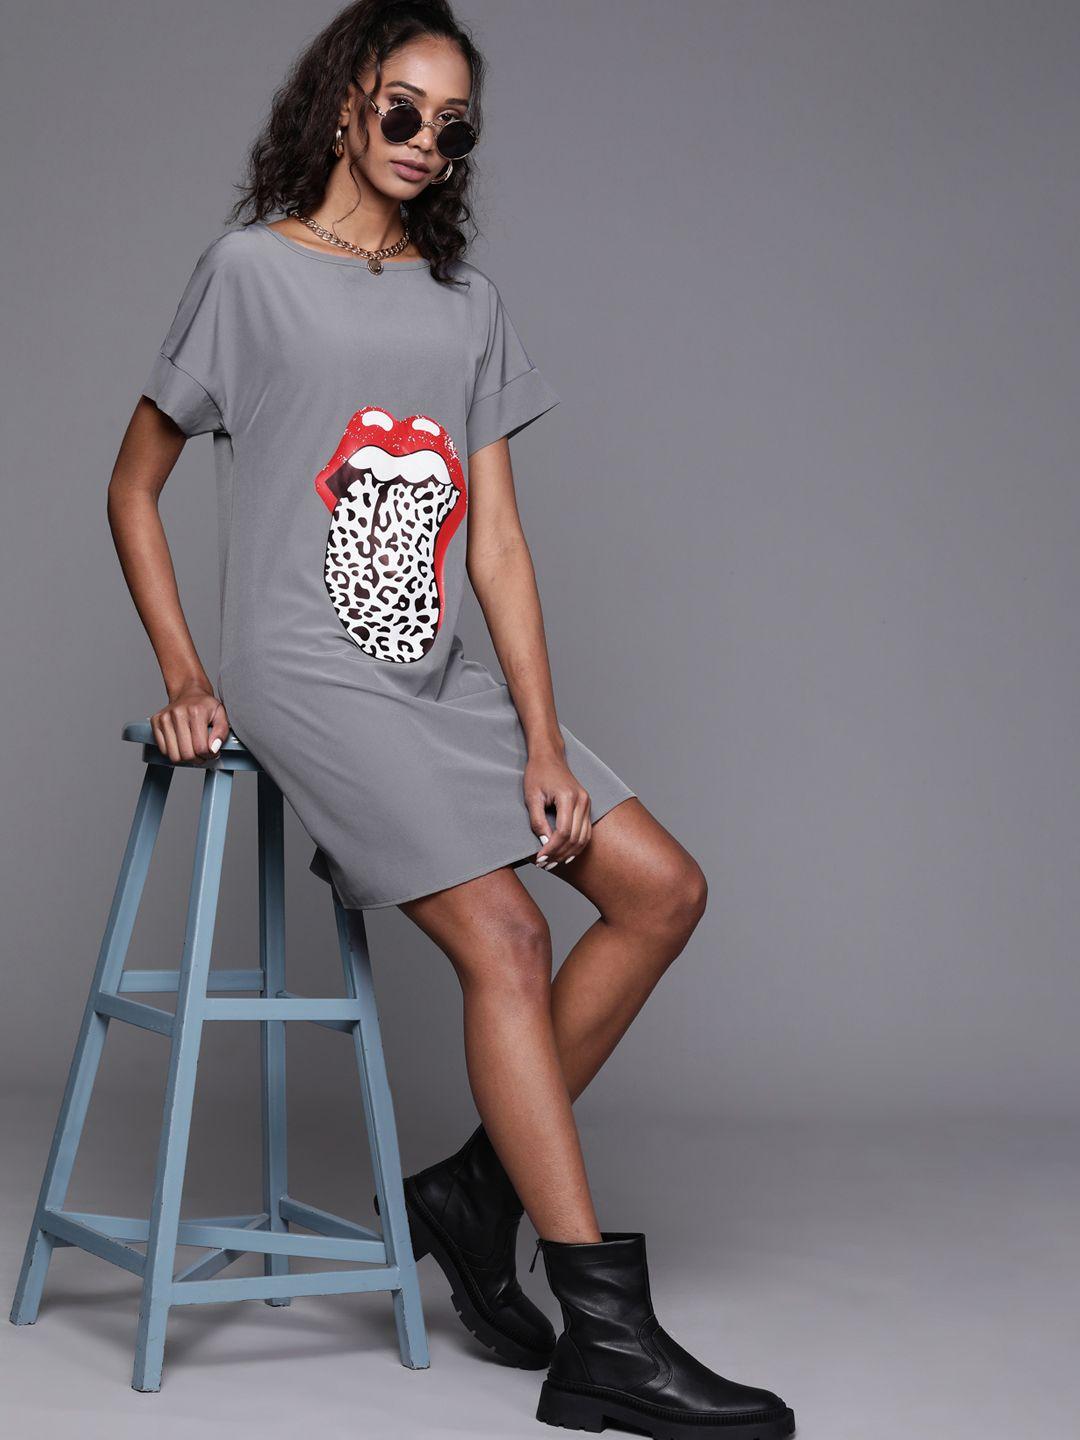 jc mode grey & white the rolling stones printed t-shirt dress